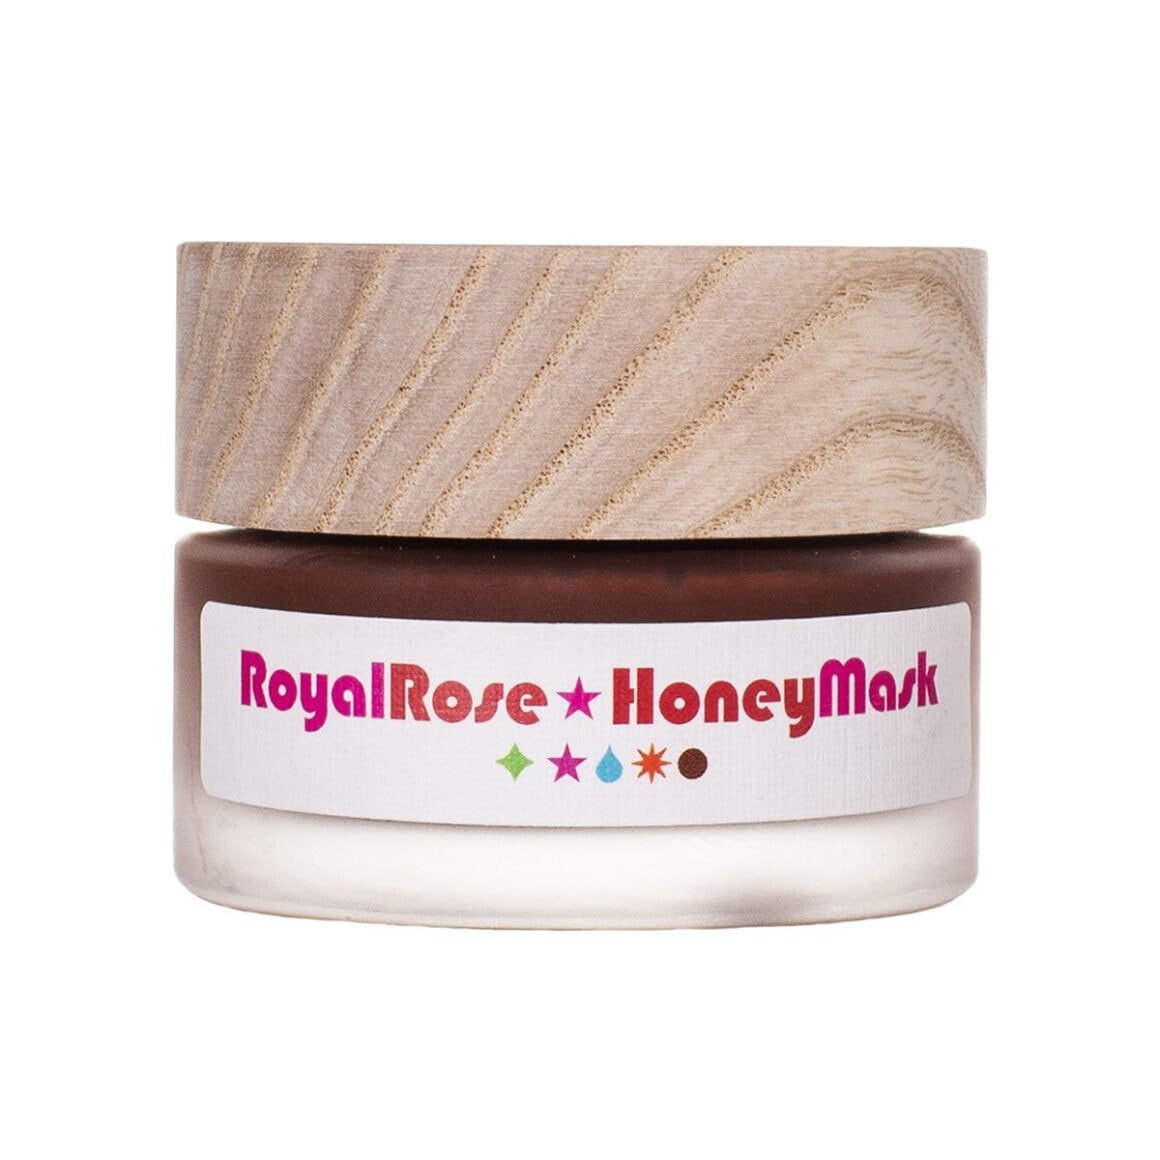 Shop Living Libations Royal Rose Honey Mask, an exfoliating honey clay mask for smoother, clearer skin.